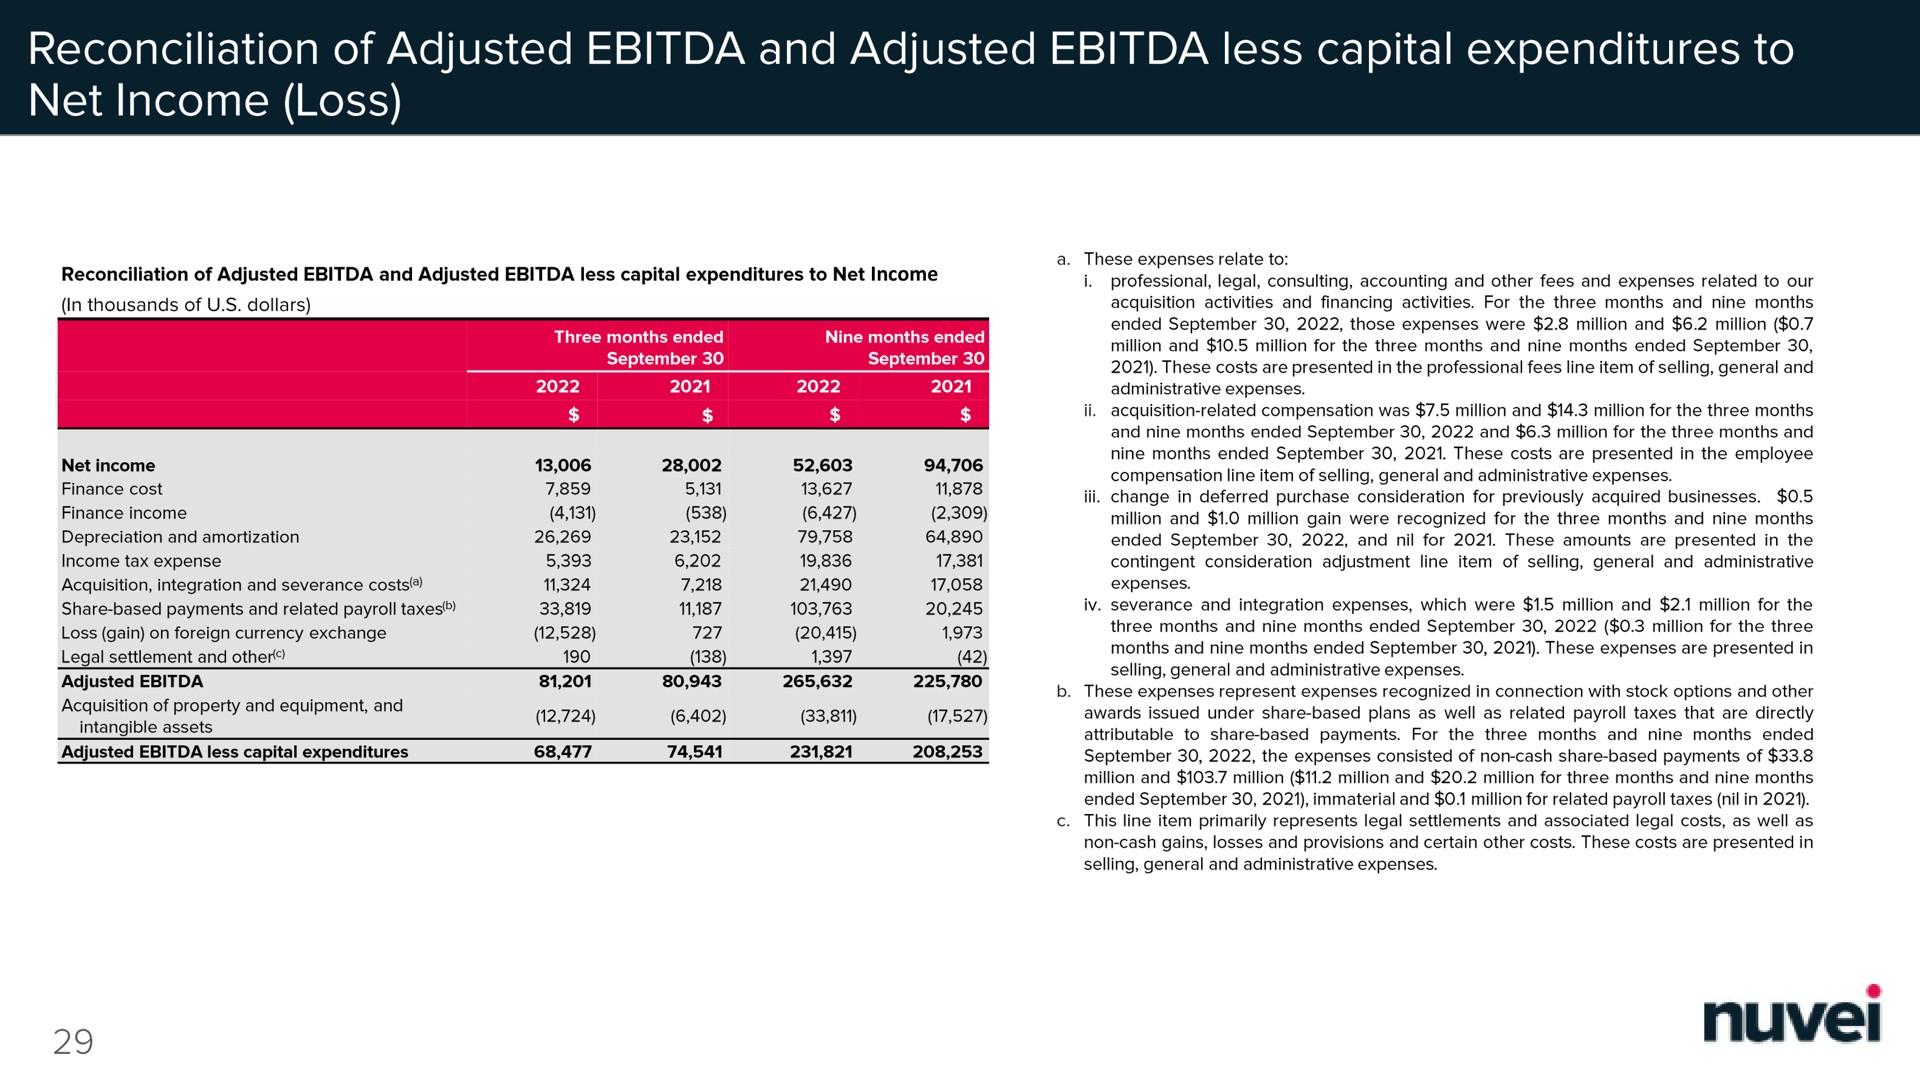 reconciliation of adjusted and adjusted less capital expenditures to net income loss | Nuvei